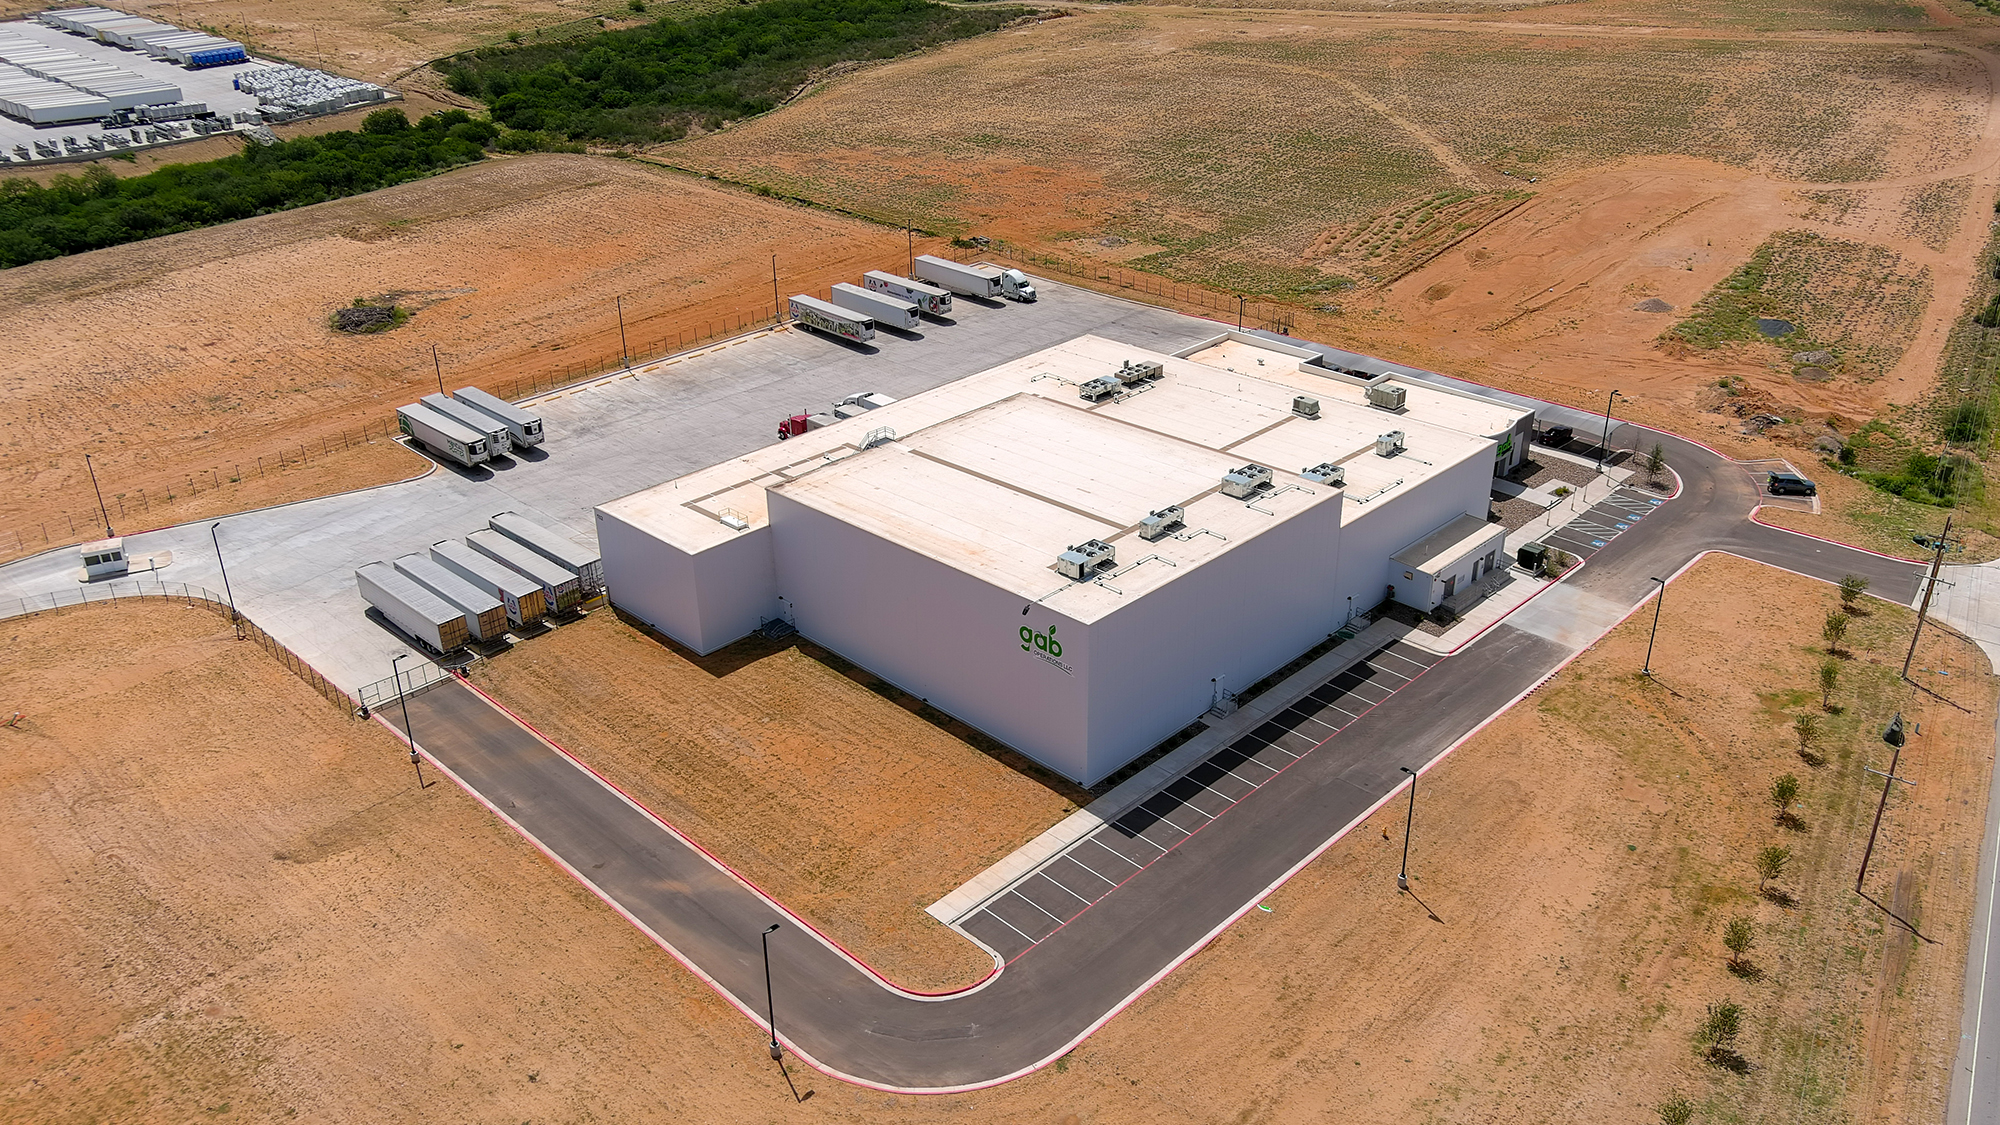 Food facility renovation or new construction? GAB Operations commissioned A M King to design and build a new cold storage distribution center in Laredo, TX. The finished facility is pictured here. Facility renovation or new construction?